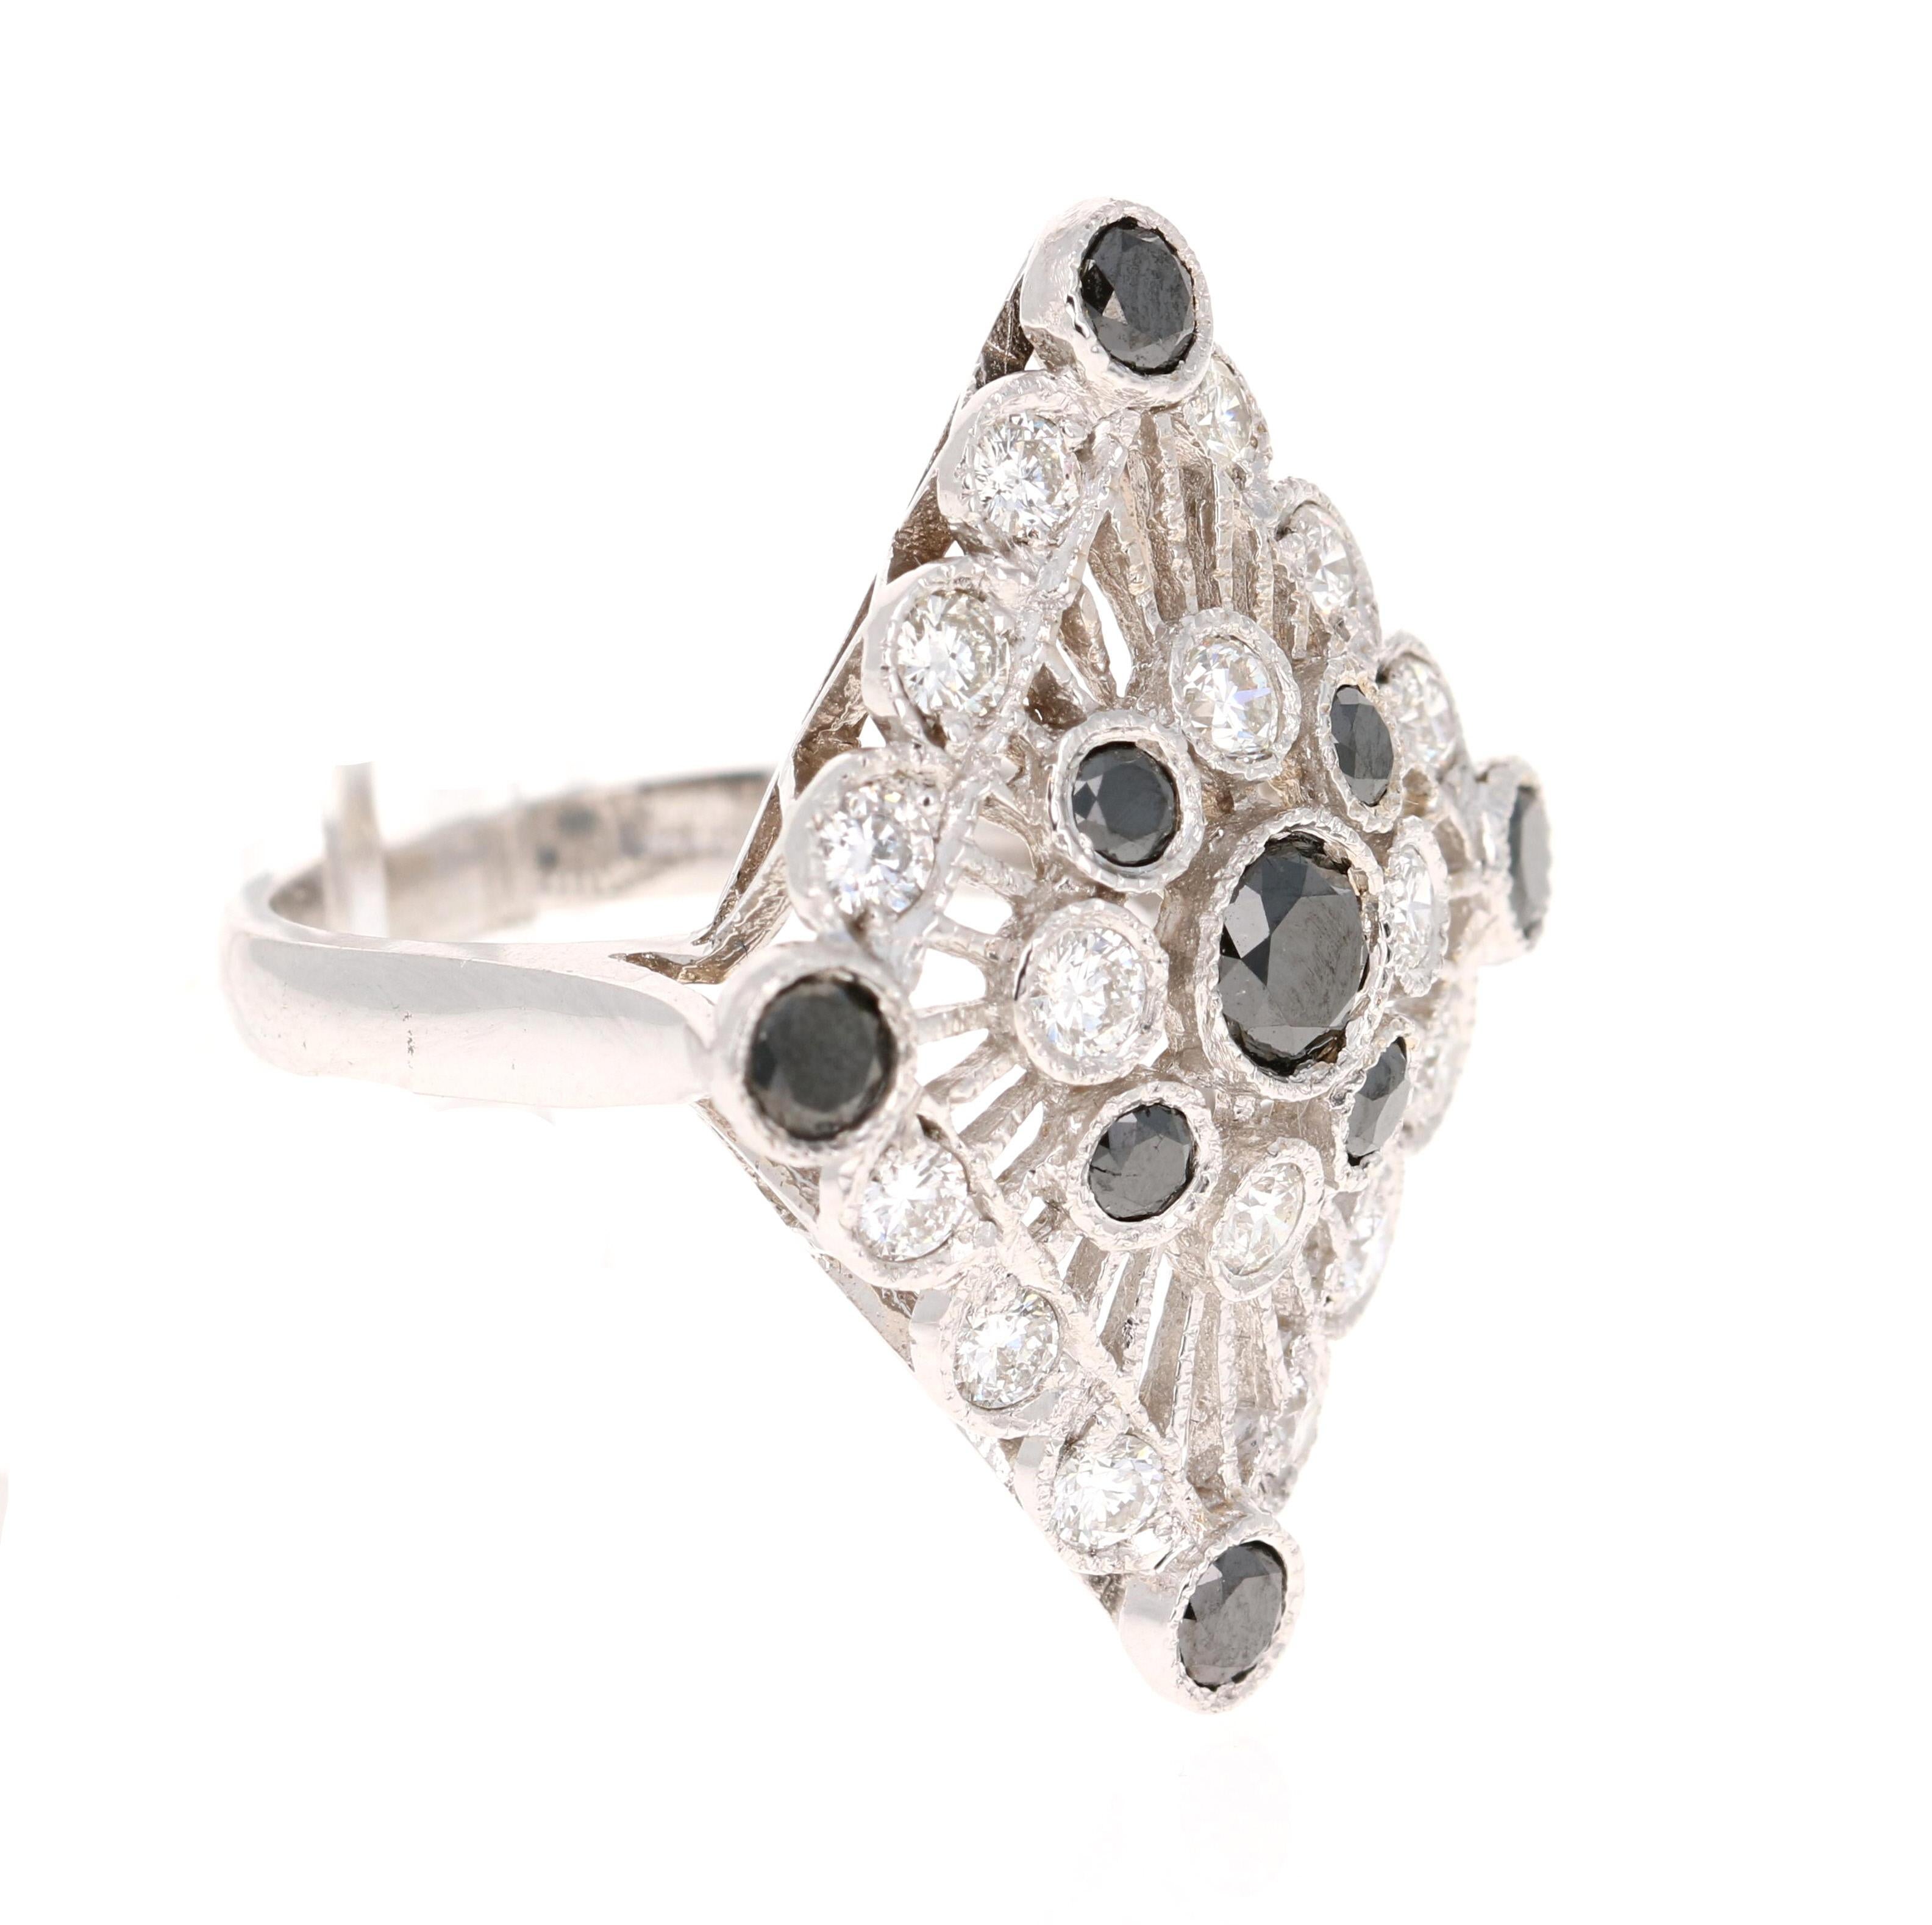 Late Victorian 1.73 Carat Black and White Diamond Cocktail Ring For Sale